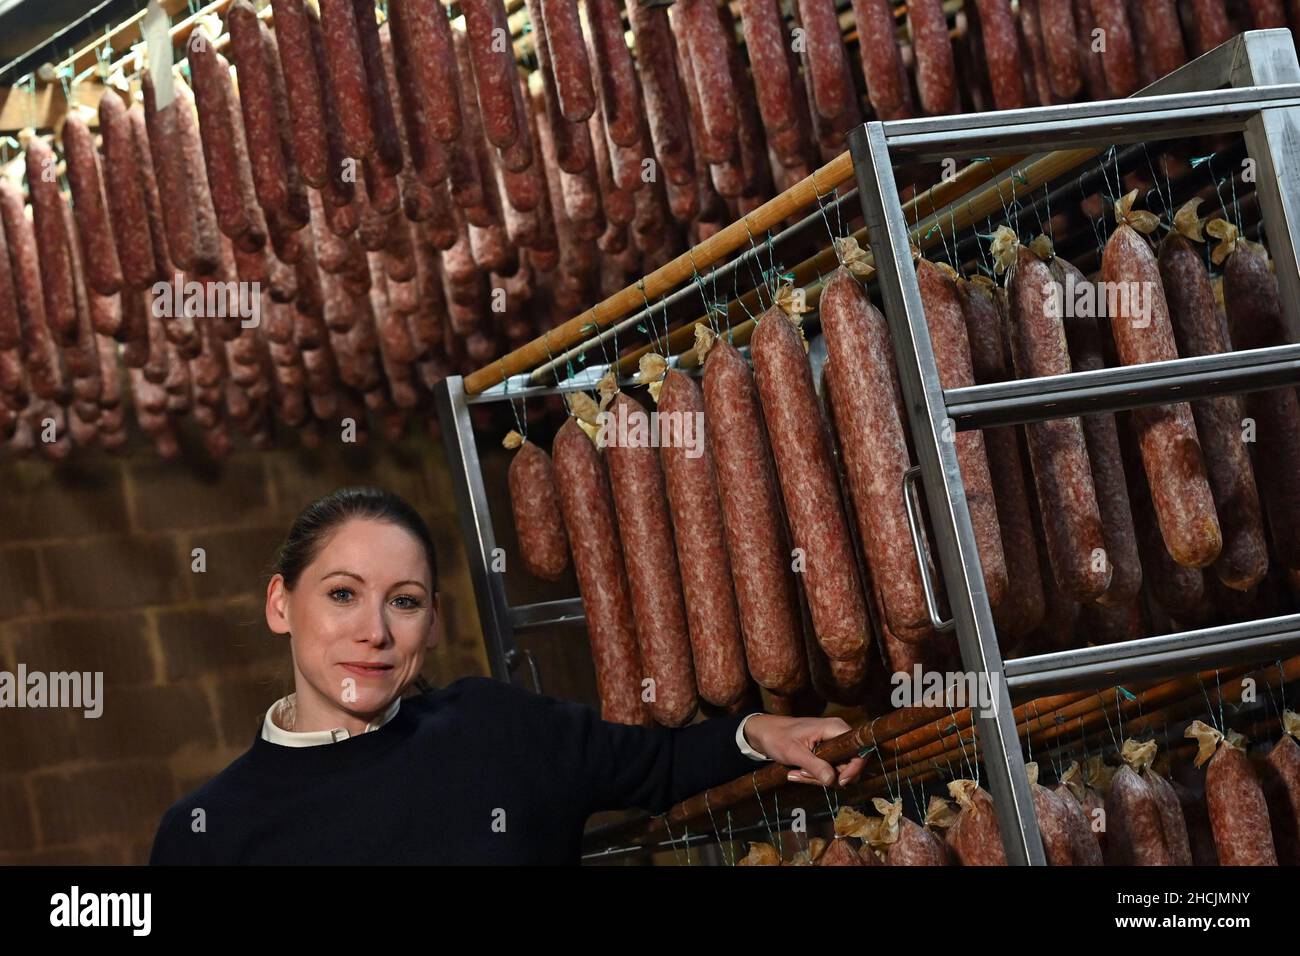 Calden, Germany. 27th Dec, 2021. Katharina Koch, Managing Director of Landfleischerei Henry Koch, stands next to 'Ahlen Würsten', a North Hessian sausage speciality. The company has been producing the air-dried mettwurst, which has its origins in the house slaughtering that used to be common, since 1877. The sausages mature for between four weeks and twelve months in the sausage heaven, a chamber surrounded by clay walls. (to dpa: 'Northern Hesse's 'Ahle Wurst': Cult object between tradition and innovation') Credit: Uwe Zucchi/dpa/Alamy Live News Stock Photo